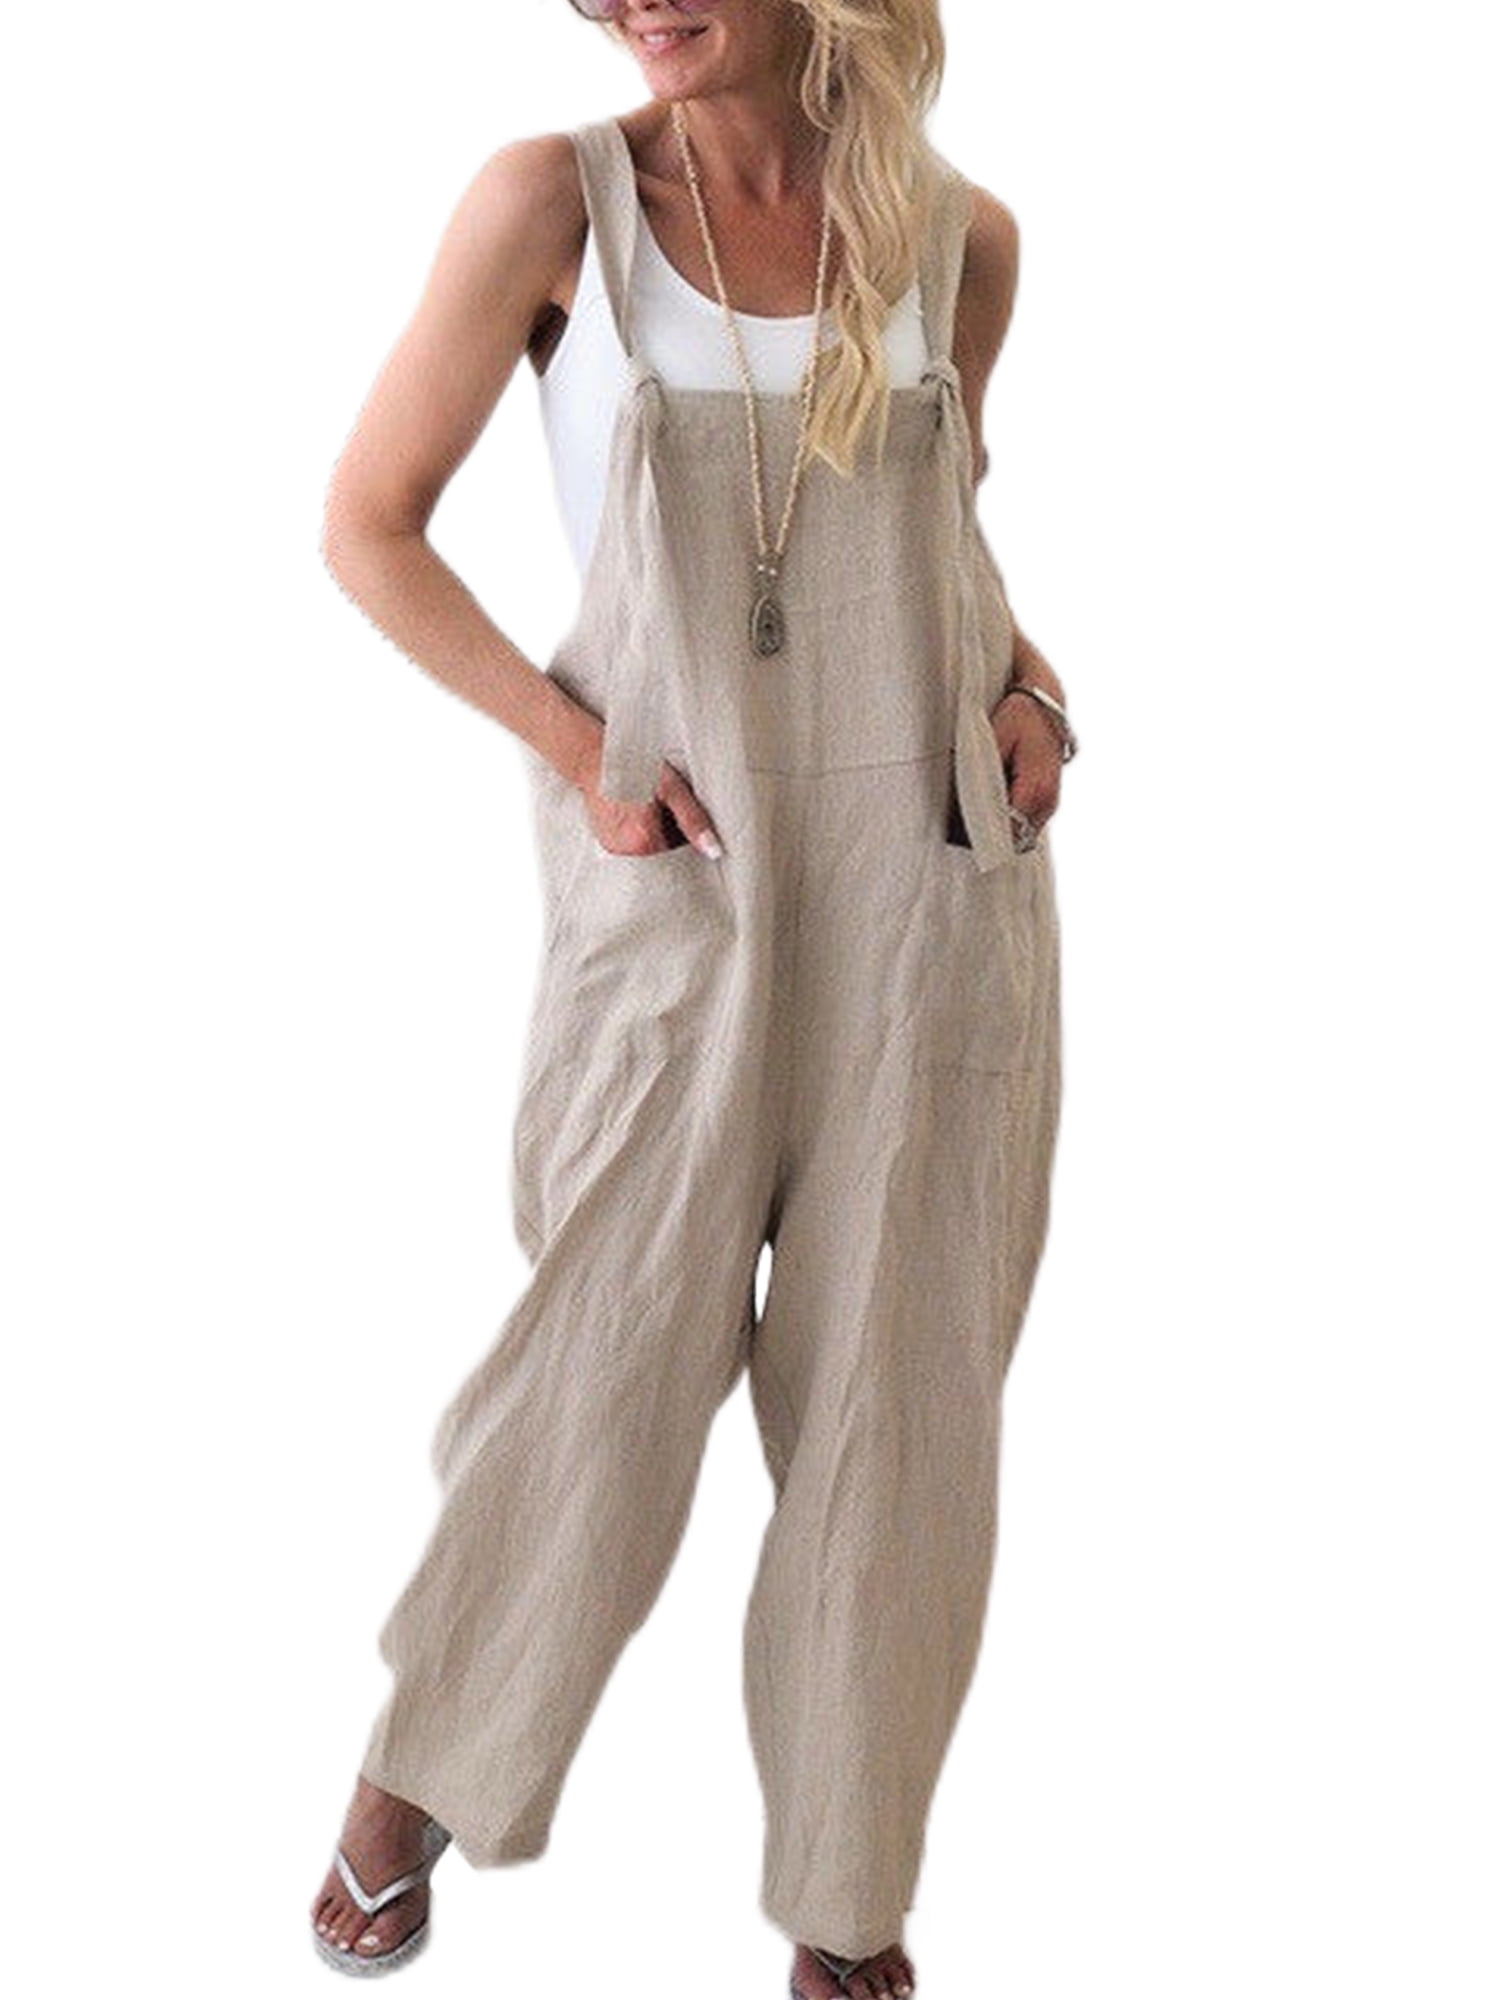 Women Loose Cotton Linen Jumpsuit Dungarees Playsuit Straps Overalls  Trousers Ladies Sleeveless Baggy Pockets Long Pants